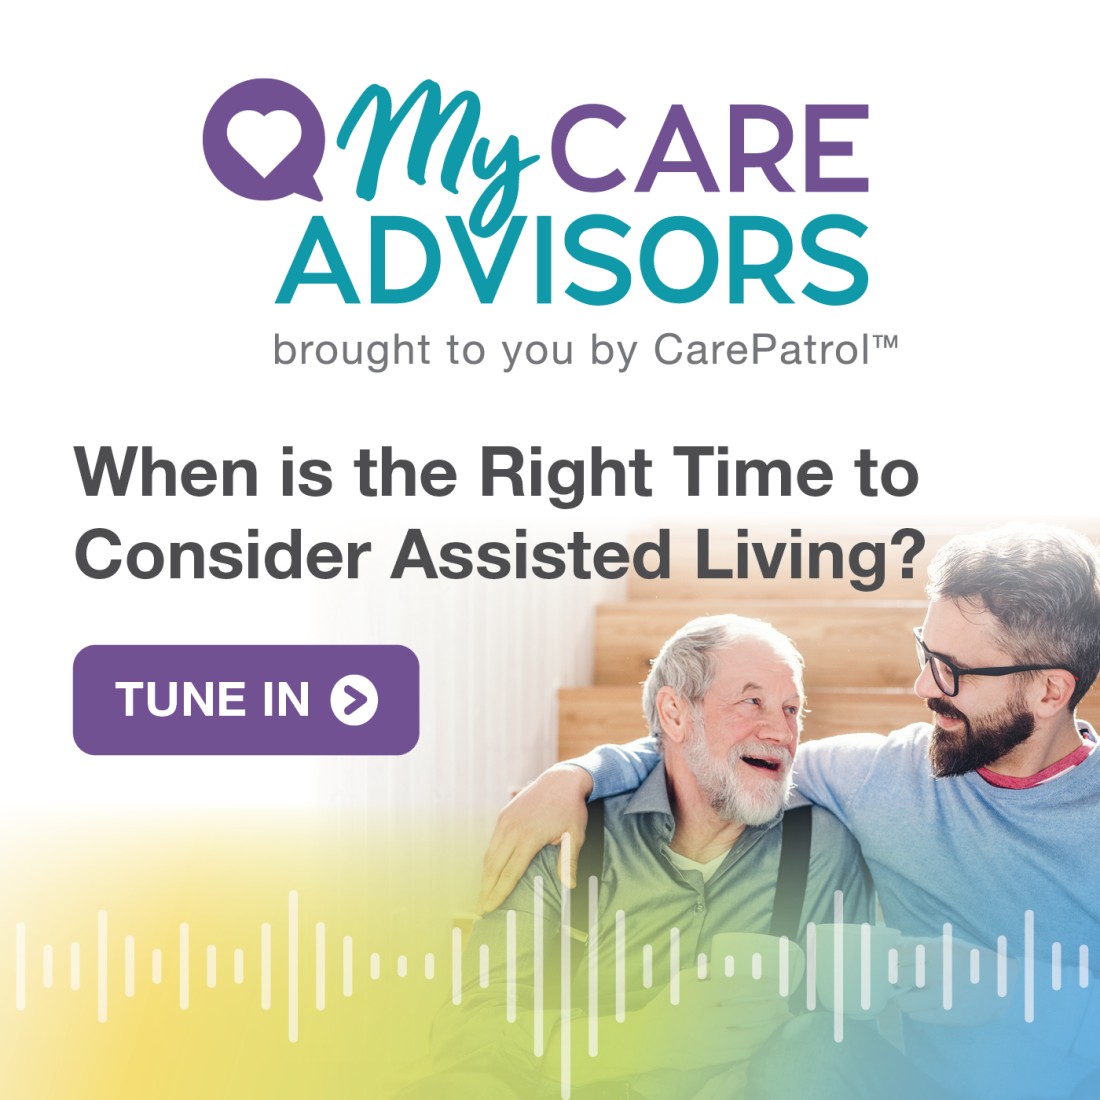 Senior Care Advisors Resources | Senior Care Solutions - Social_Media_Graphic__When_is_the_Right_Time_to_Consider_Assisted_Living